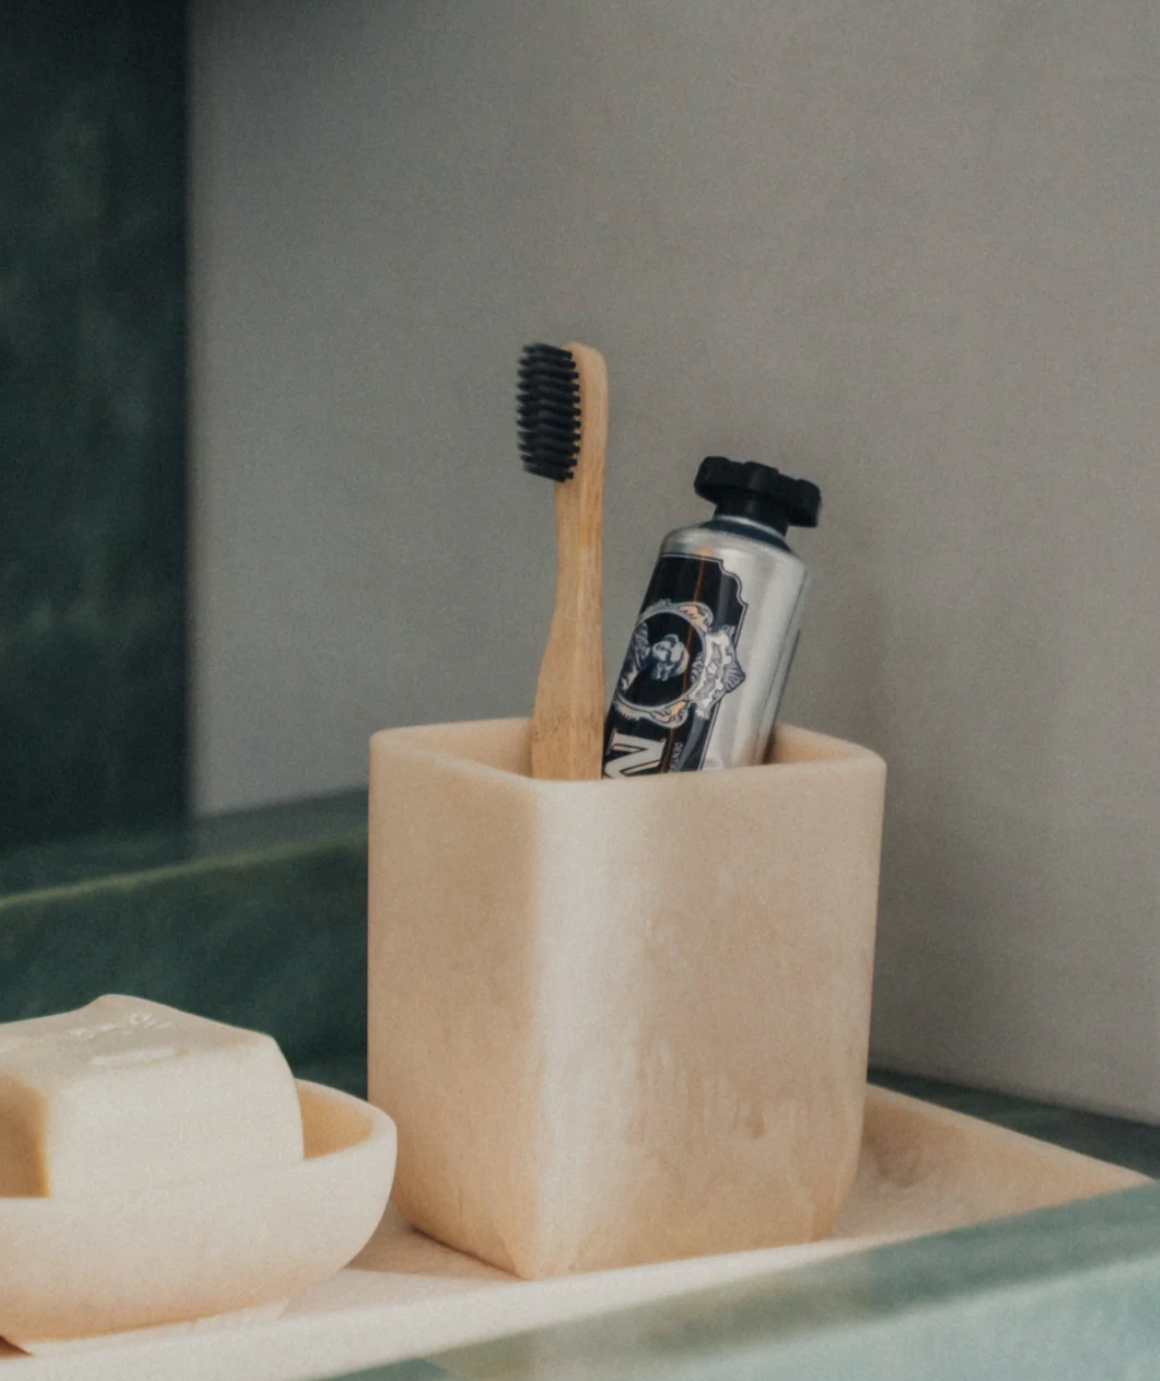 Flow Resin Toothbrush Holder | Marshmallow The Marshmallow Flow Resin Toothbrush Holder is distinctive and organic with its curved lines and marble finish. Each toothbrush holder is handmade and no two patterns are the same.  